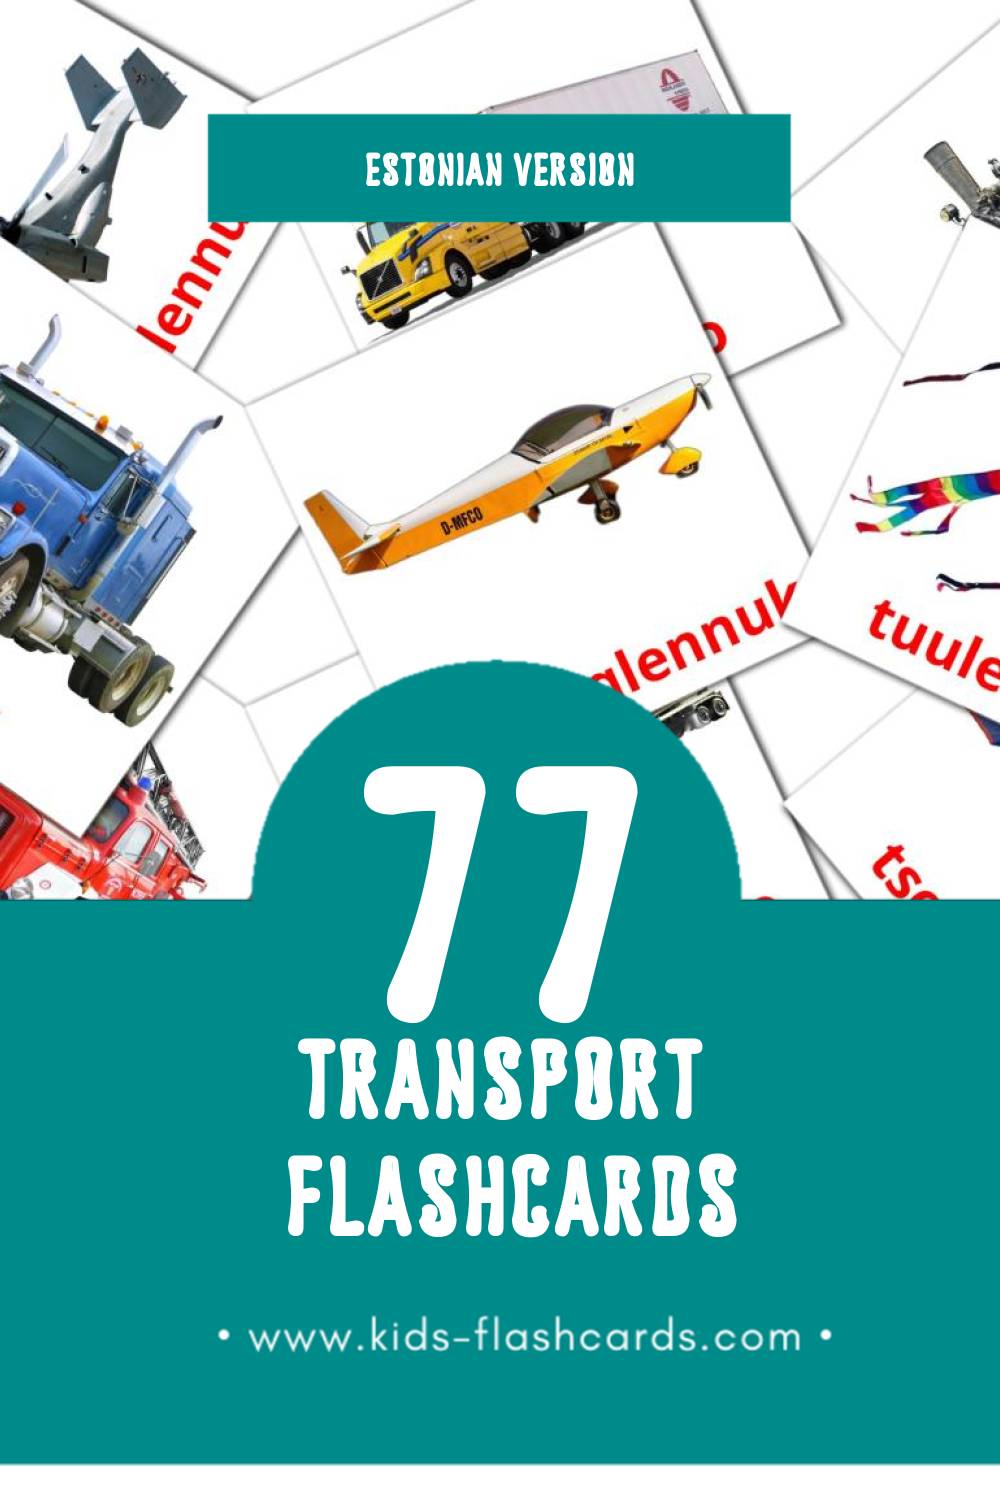 Visual Transport Flashcards for Toddlers (28 cards in Estonian)